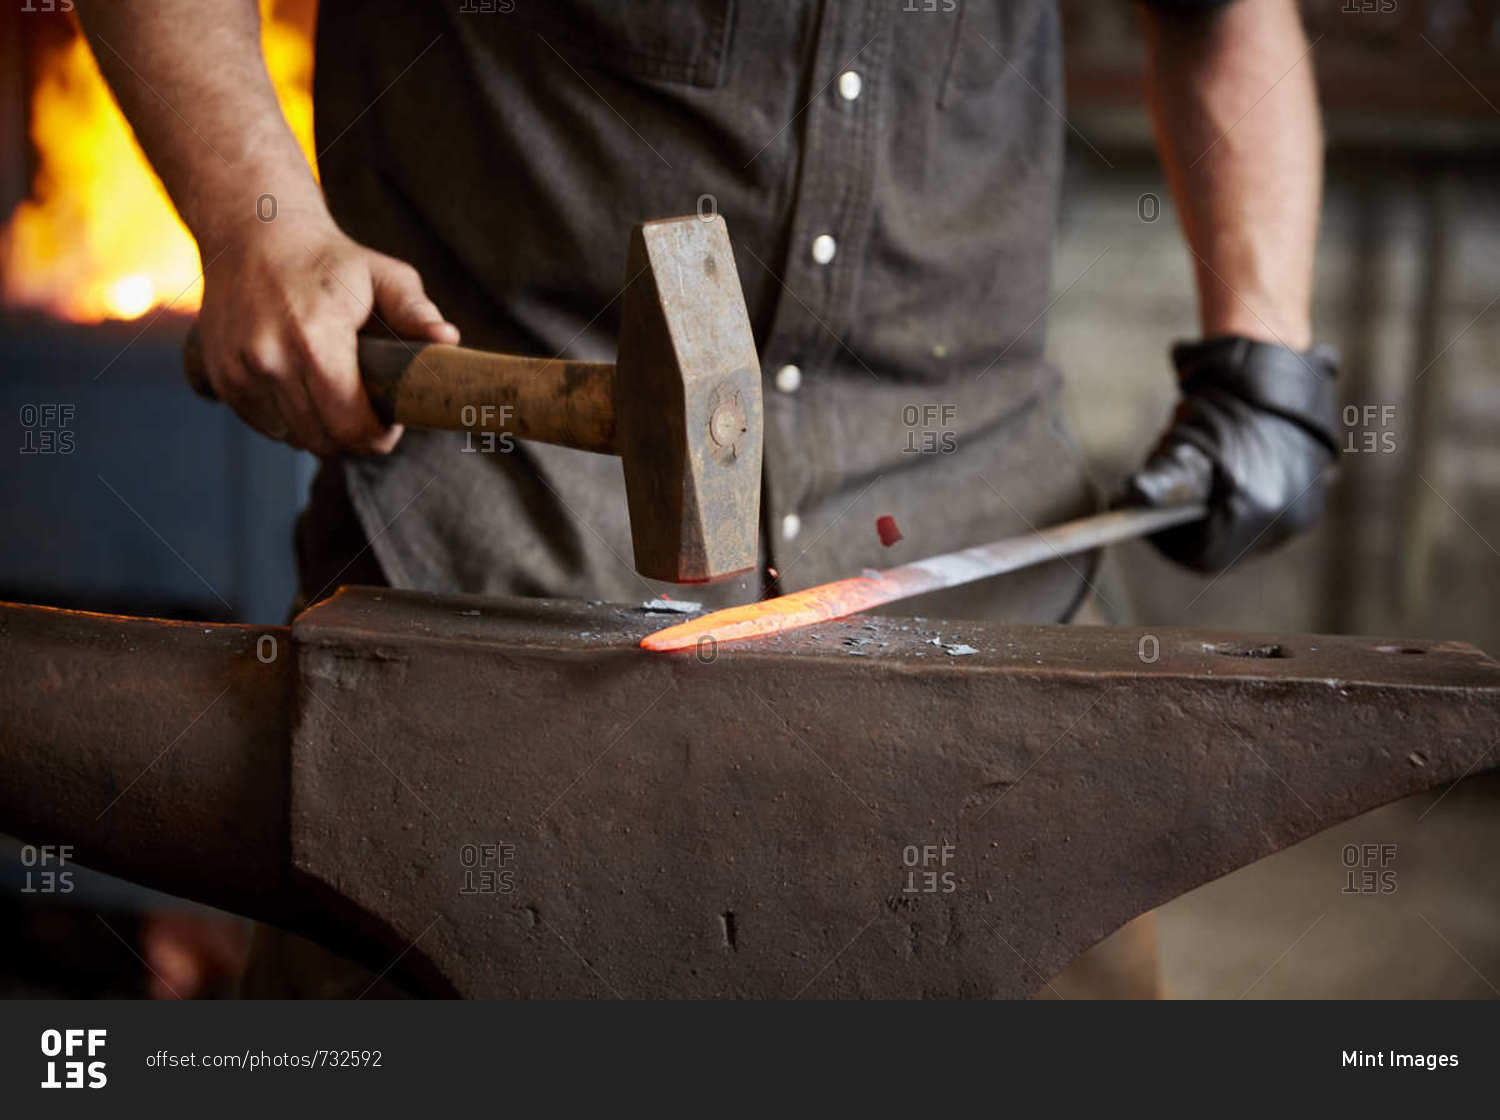 An artisan metal worker in ear protectors using a hammer to shape a red hot piece of metal on an anvil